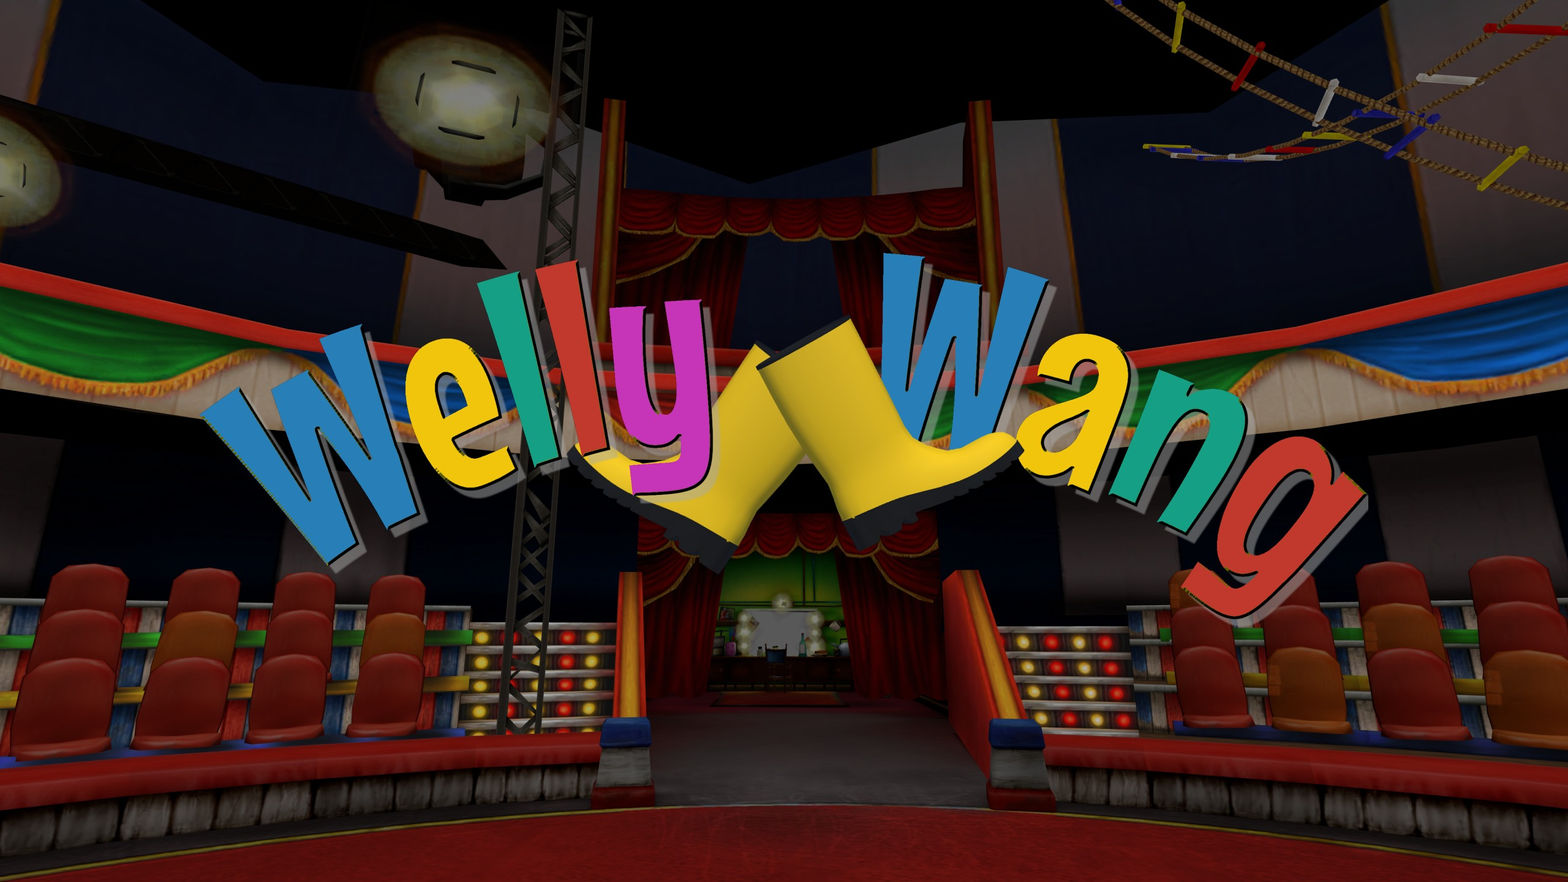 Welly Wang VR